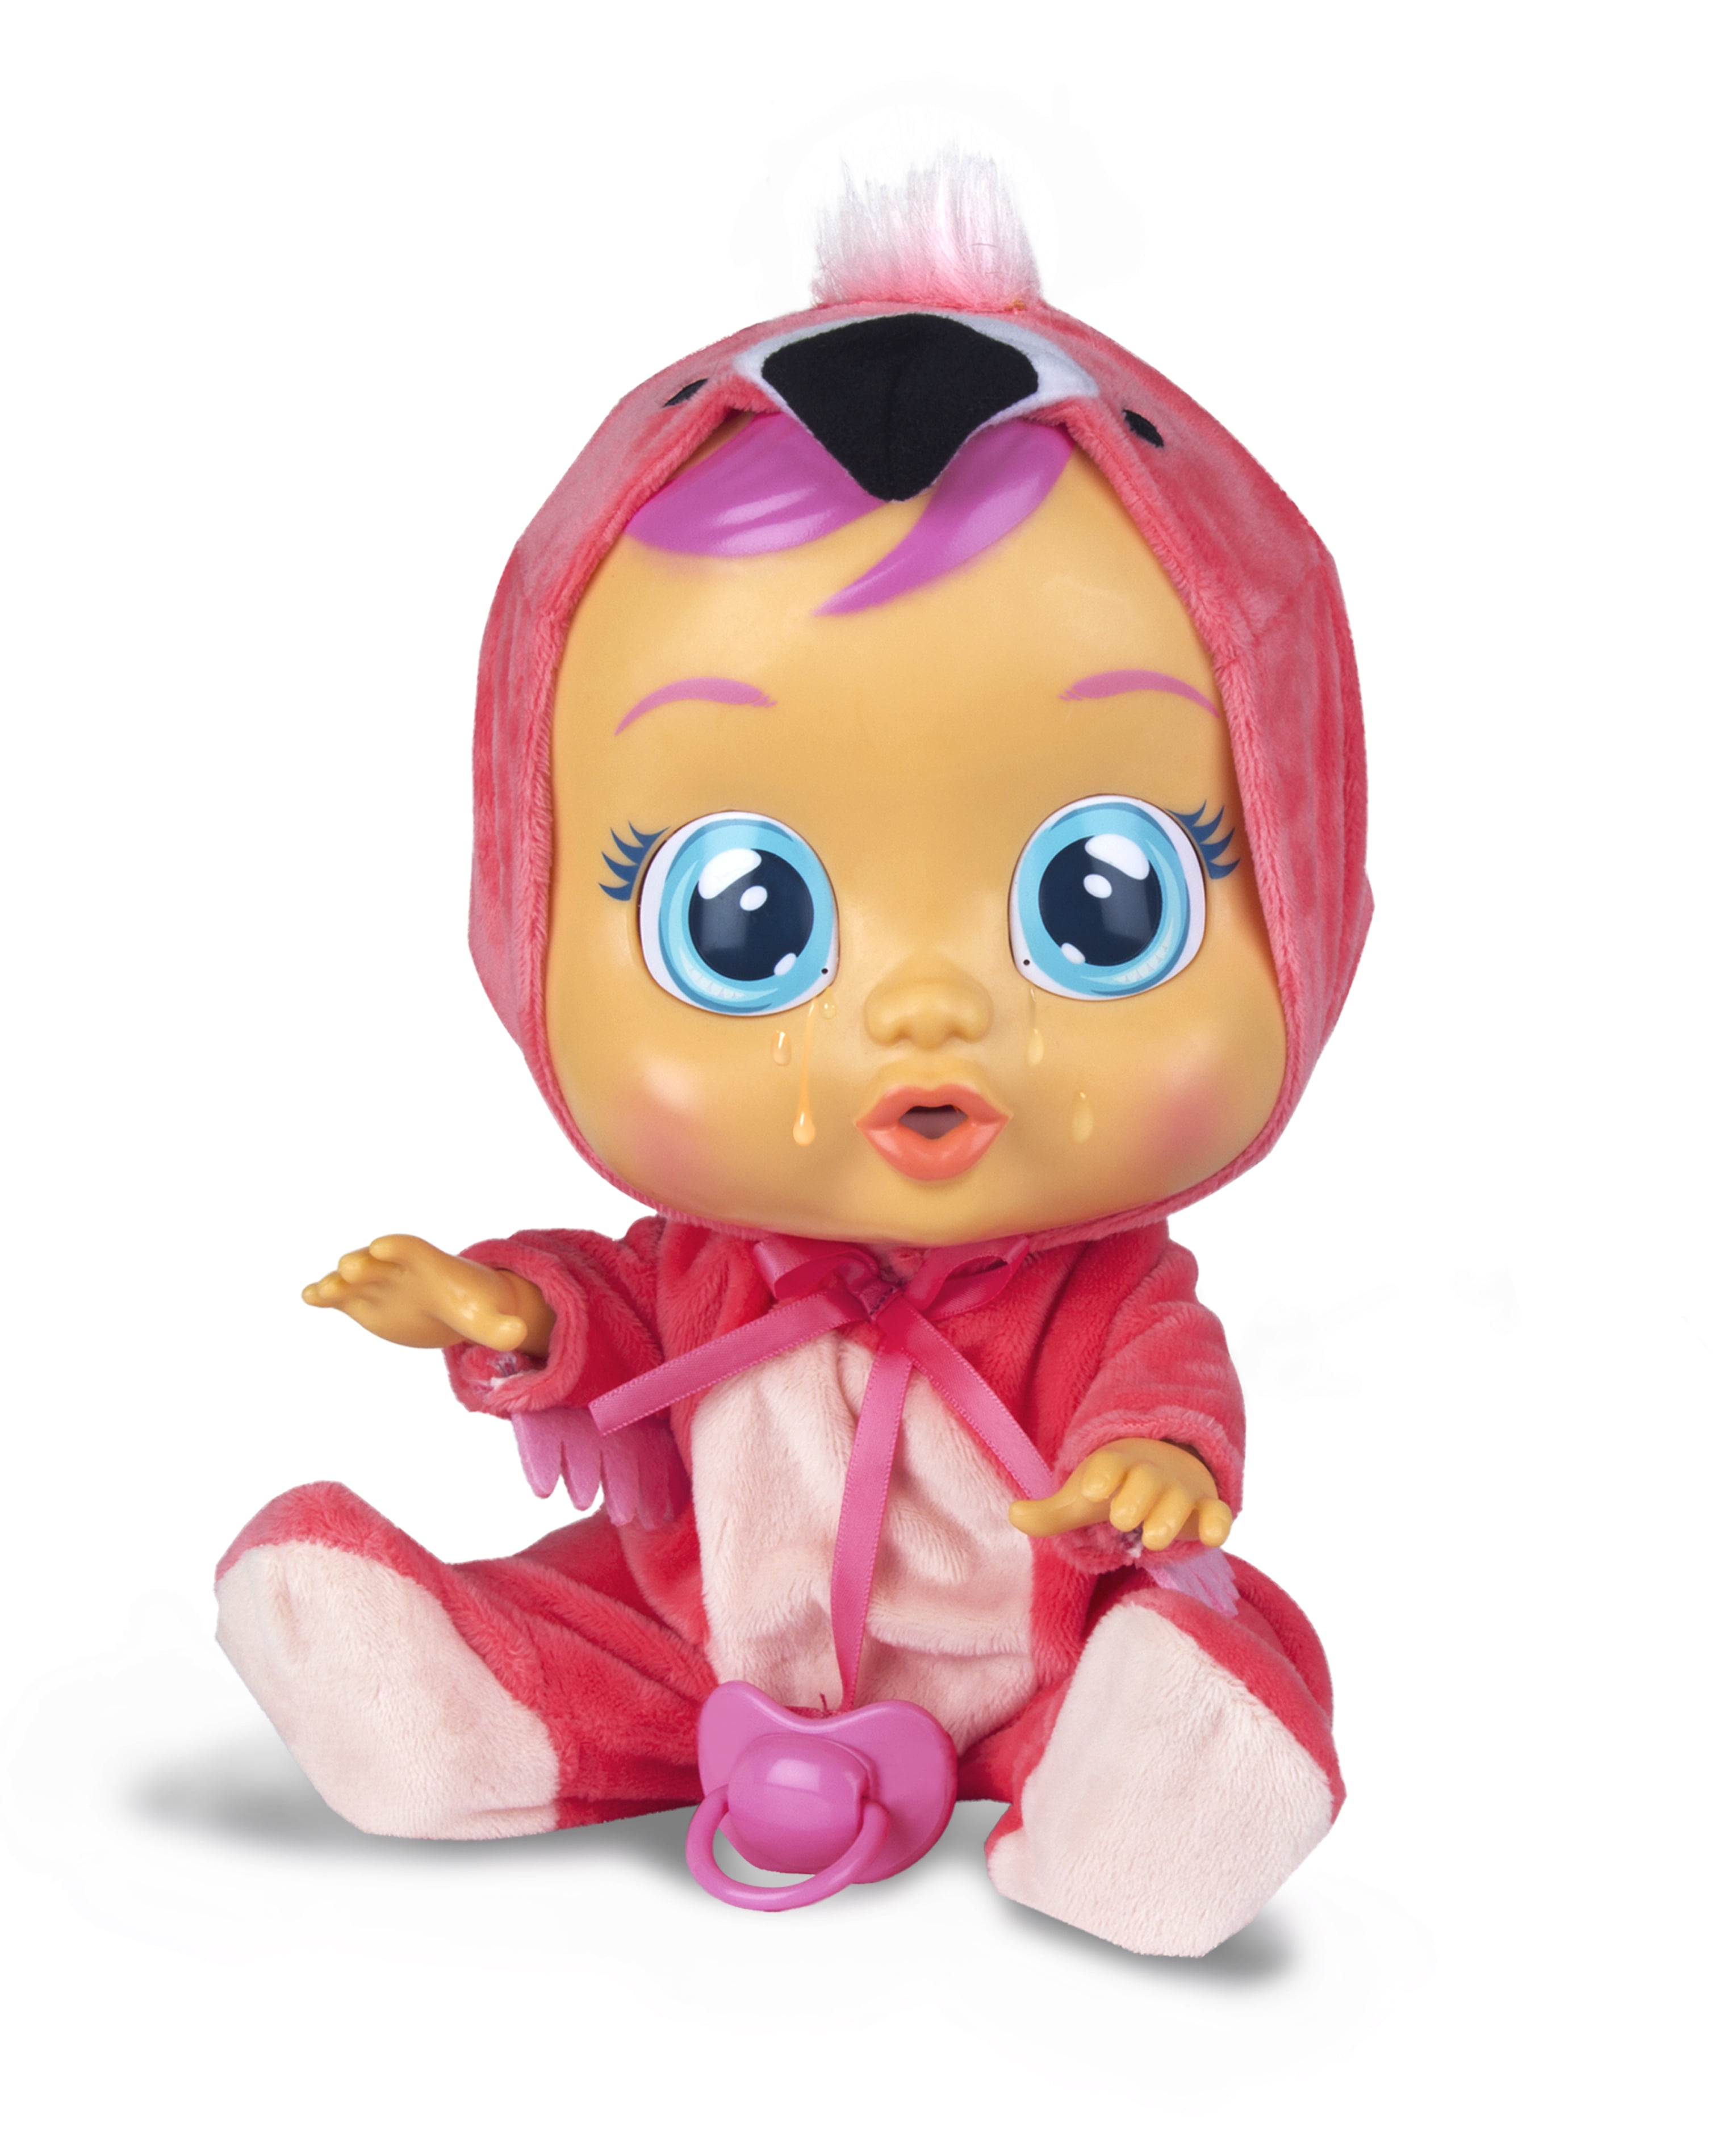 Cry Babies NARVIE Baby Doll Cries Real Tears Lights Up INTERACTIVE NEW